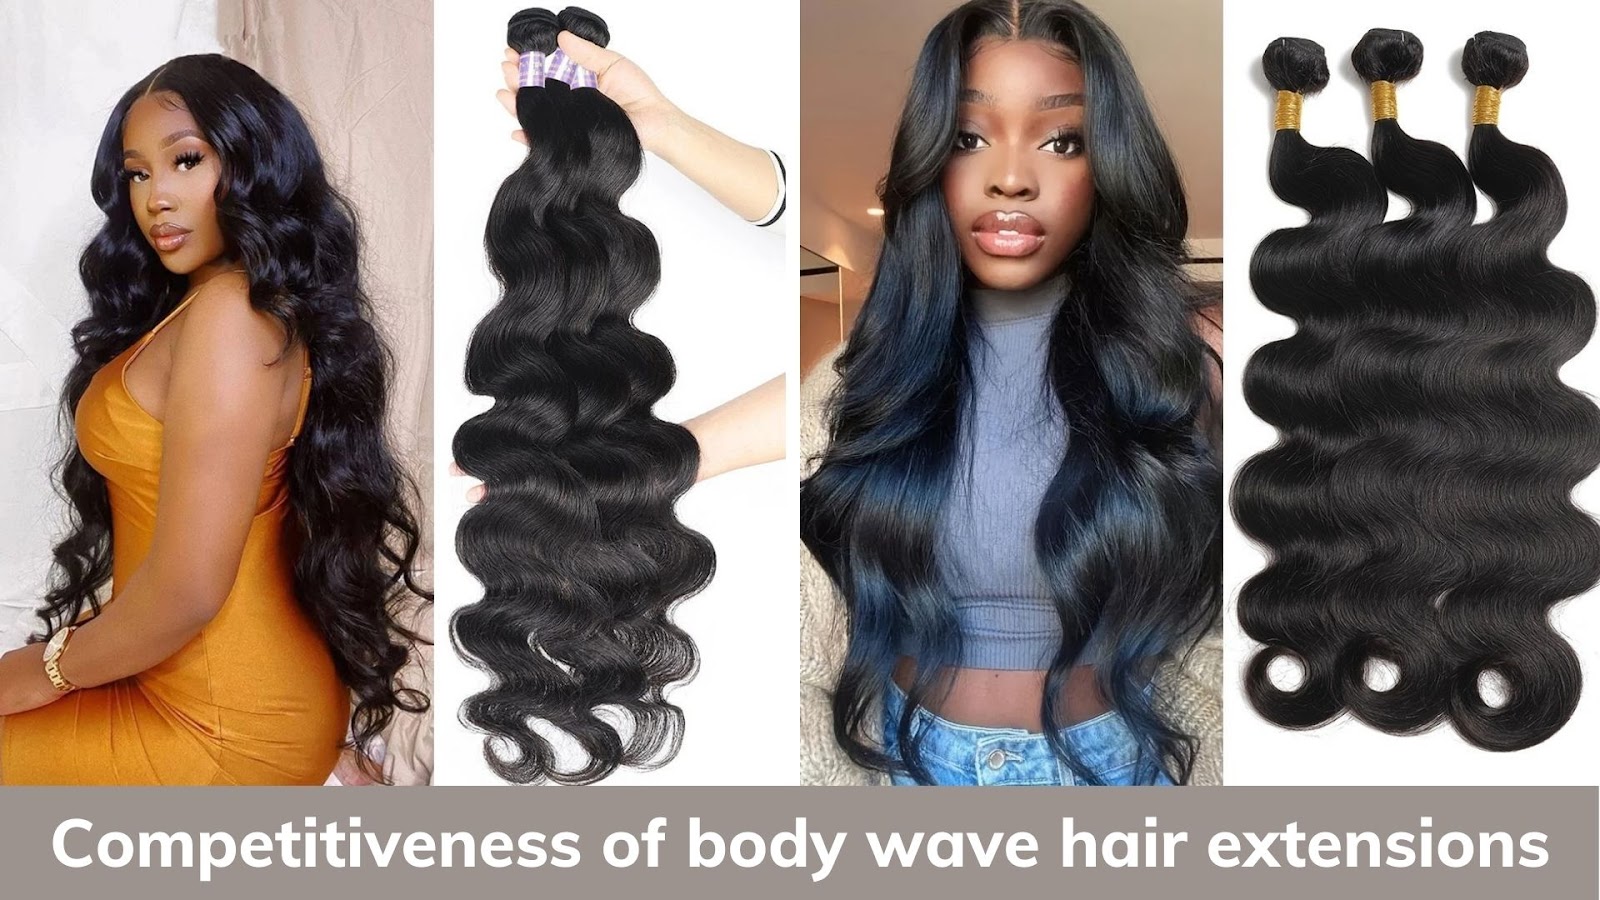 Competitiveness of body wave hair extensions